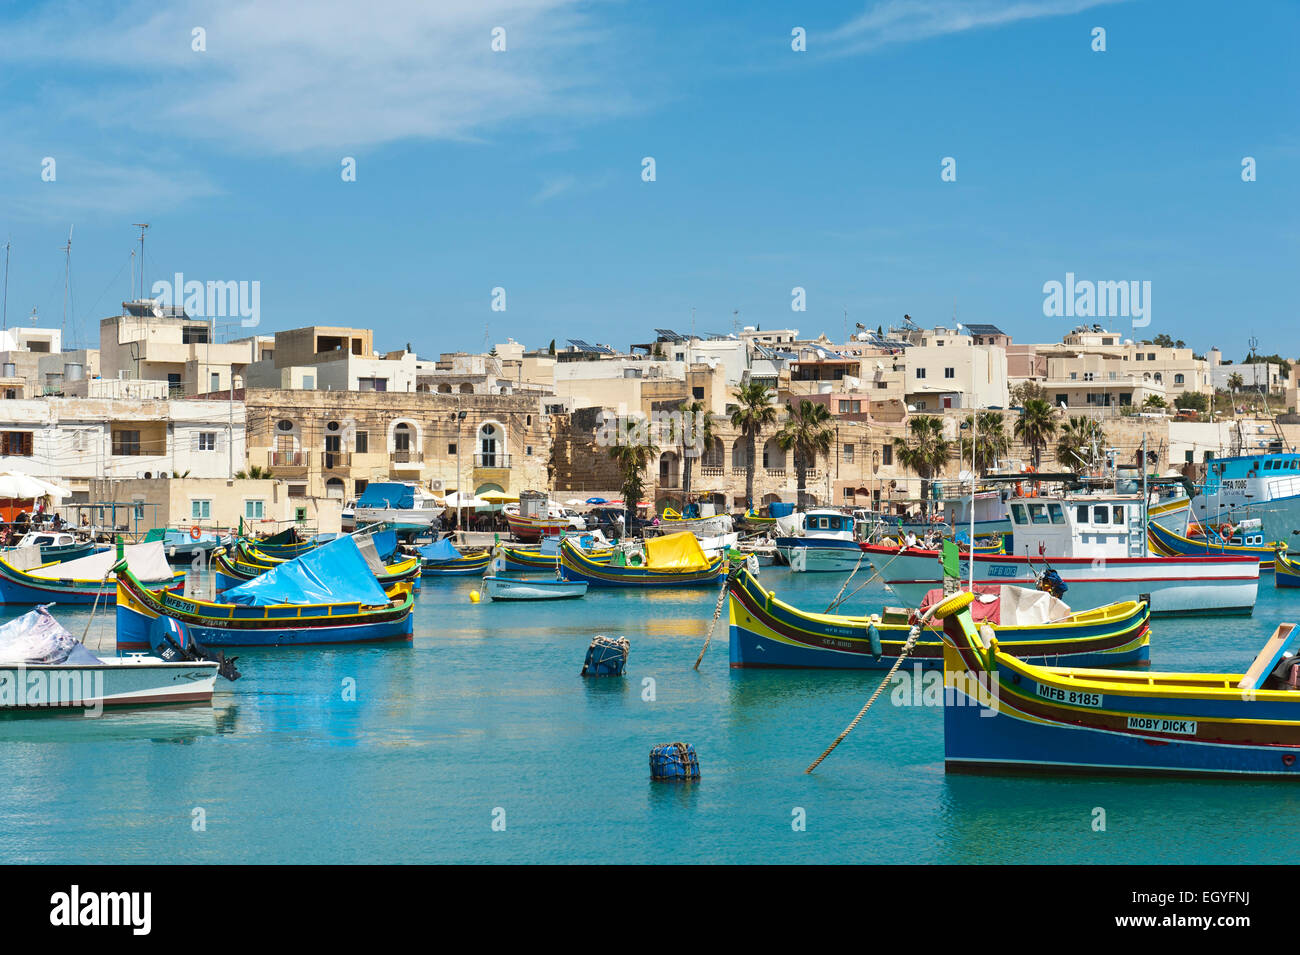 Colorfully painted traditional fishing boats, Luzzu, harbour of Marsaxlokk, Malta Stock Photo